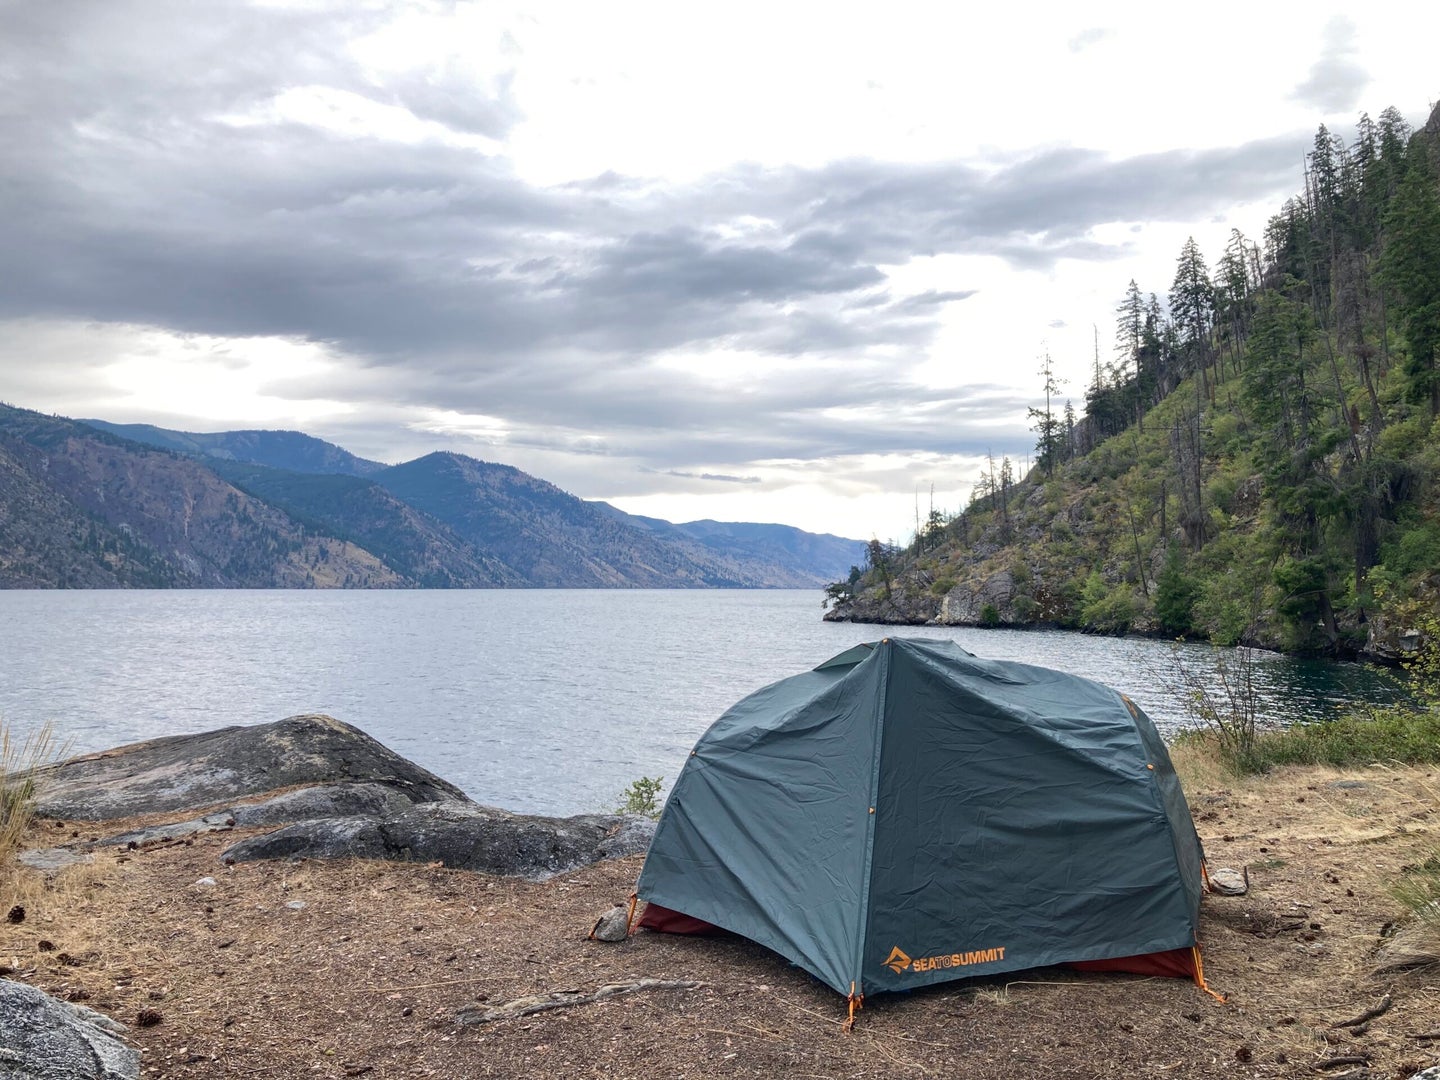 A green camping tent pitched on the ground in front of a lake and mountains.